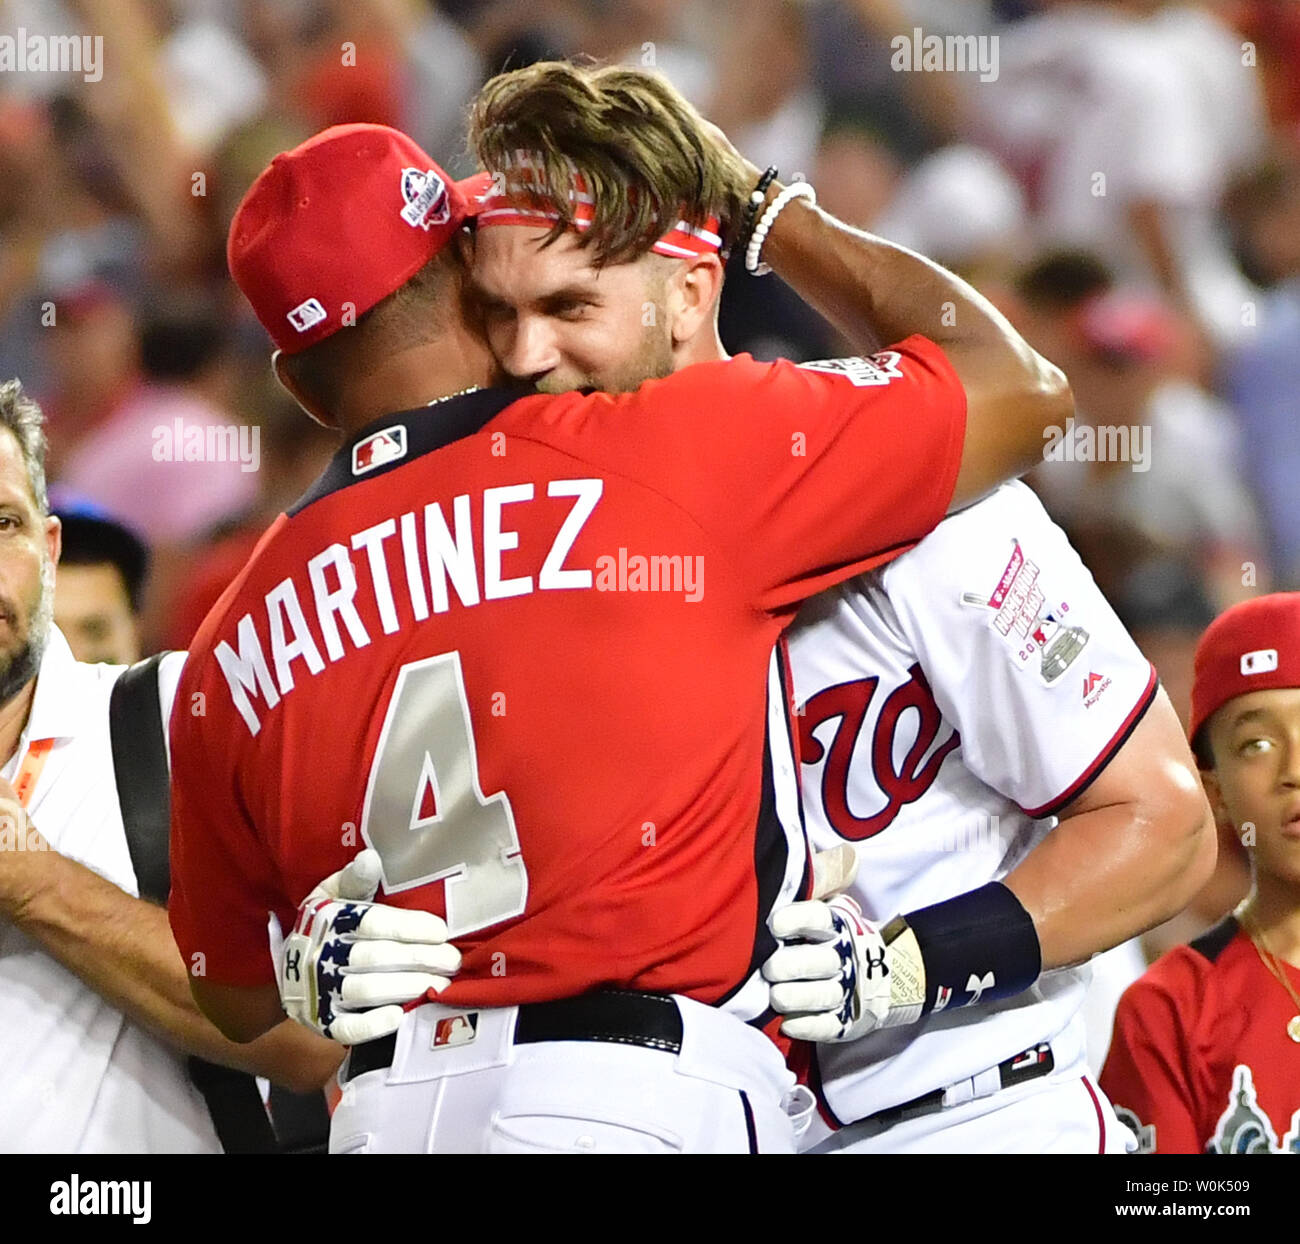 Bryce Harper Washington Nationals Game-Used #34 Red Jersey with All-Star  Game Patch vs. Atlanta Braves on September 15 2018